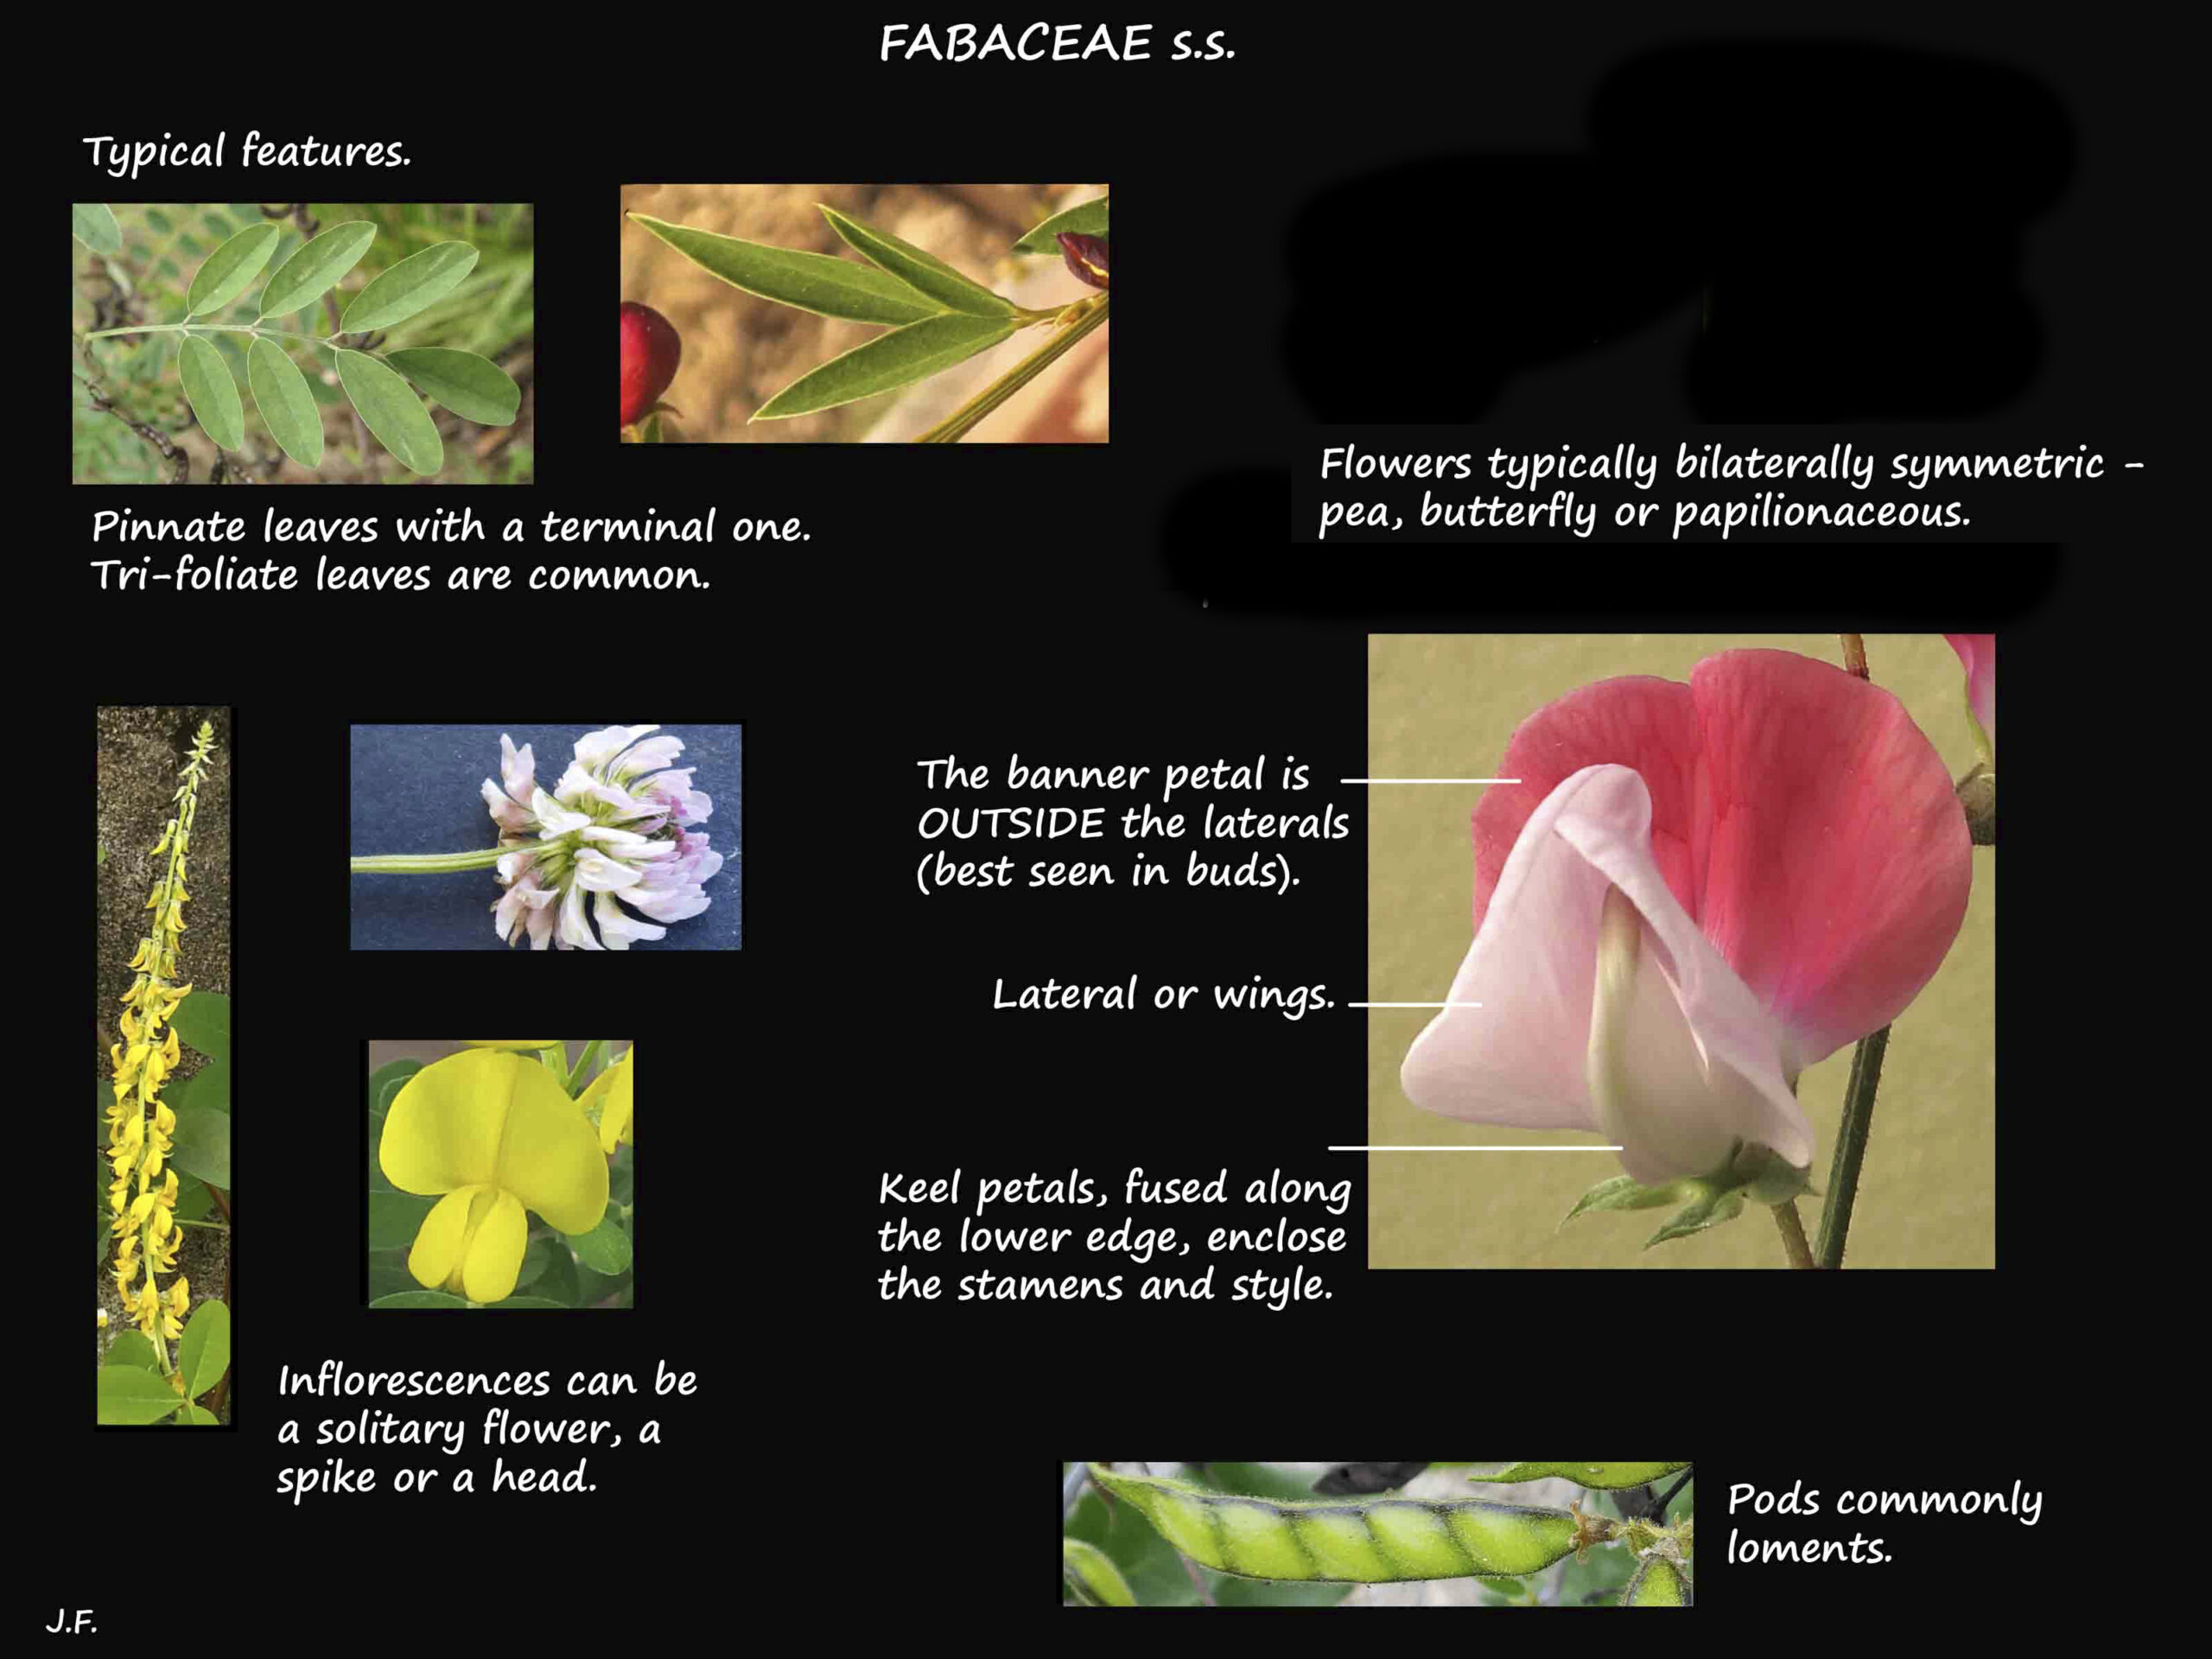 1 Fabaceae s.s. features